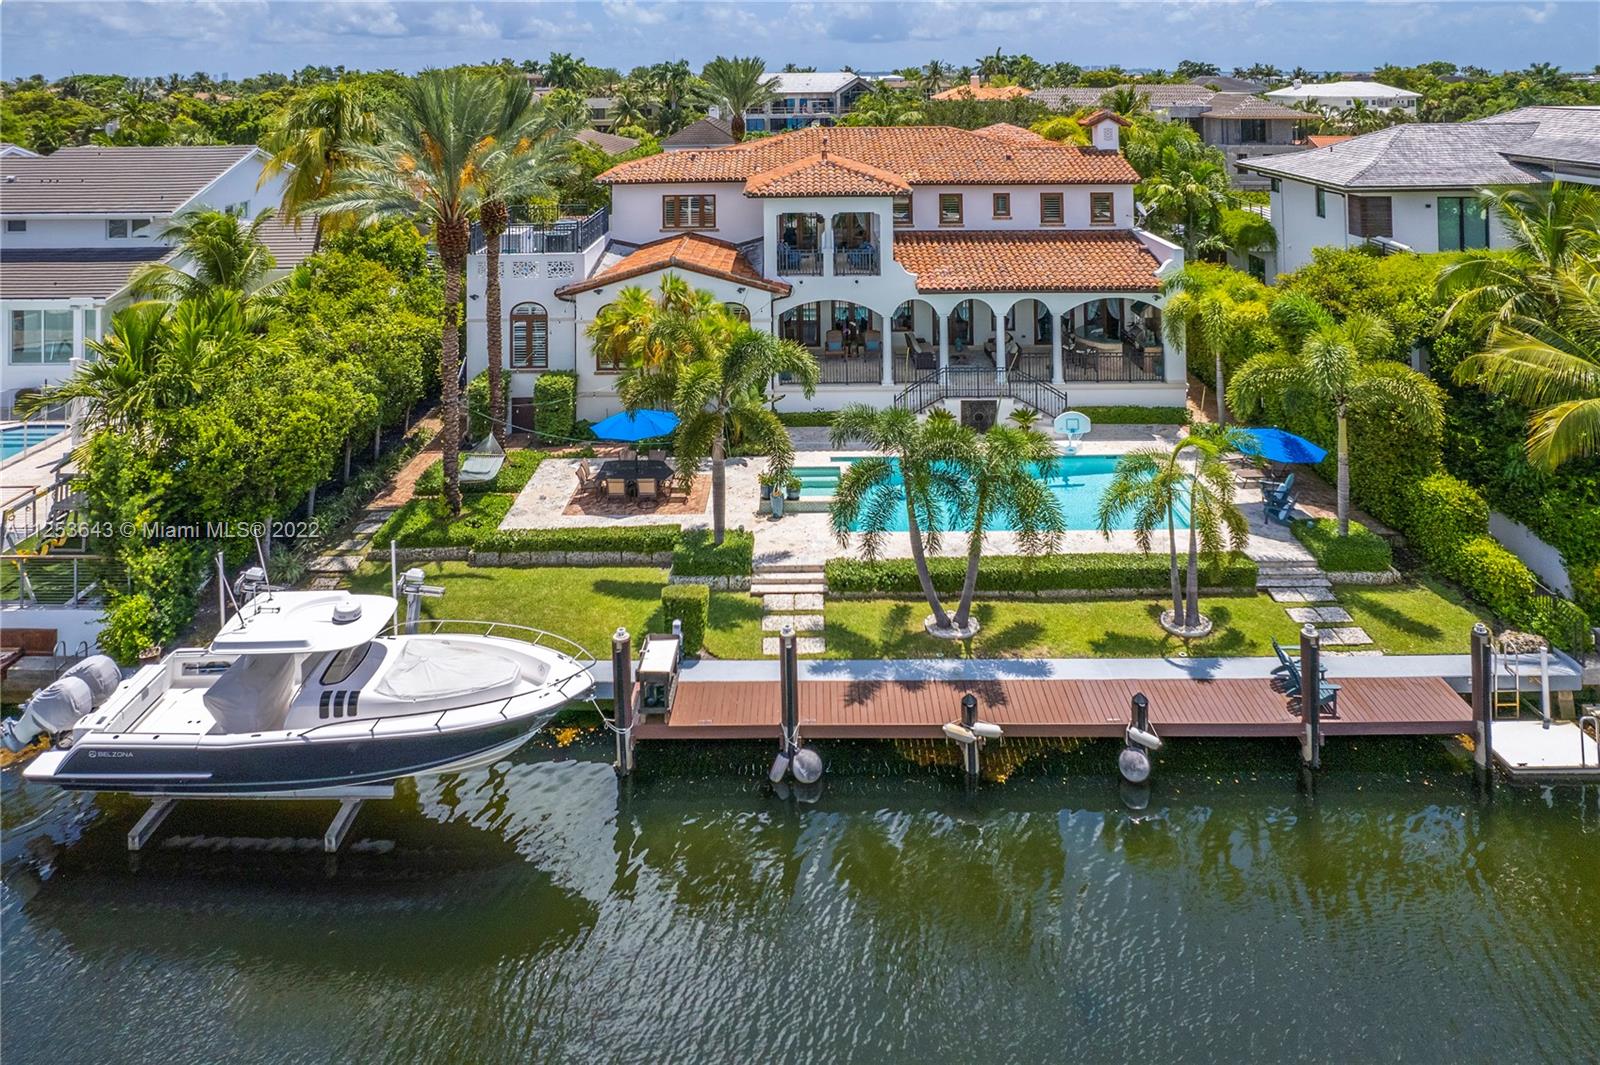 Stunning 2008 built home w/ beautiful details & great water access w/ 100’ on the water & no bridges to Bay in guard gated community of Sunrise. Convenient to Coconut Grove, but ideally situated in Coral Gables this home offers  wonderful outdoor spaces including 14,000 sf lot, pool & Jacuzzi, deep covered patio w/ summer kit, 25 ton boat lift, keystone patio & storage below patio. Indoors is as ideal w/ 6br/5.5 ba, office w/ built in fireplace, custom wine cooler w/ tasting rm, white/bright kitchen w/ top of the line appliances, breakfast nook surrounded by windows, butler’s pantry w/ wine cooler, primary suite w/ private balcony, beautiful bathrm w/ separate tub & shower, dual vanities, large closets, renovated baths, laundry rm, 2 car gar w/ room for lift, full house generator.